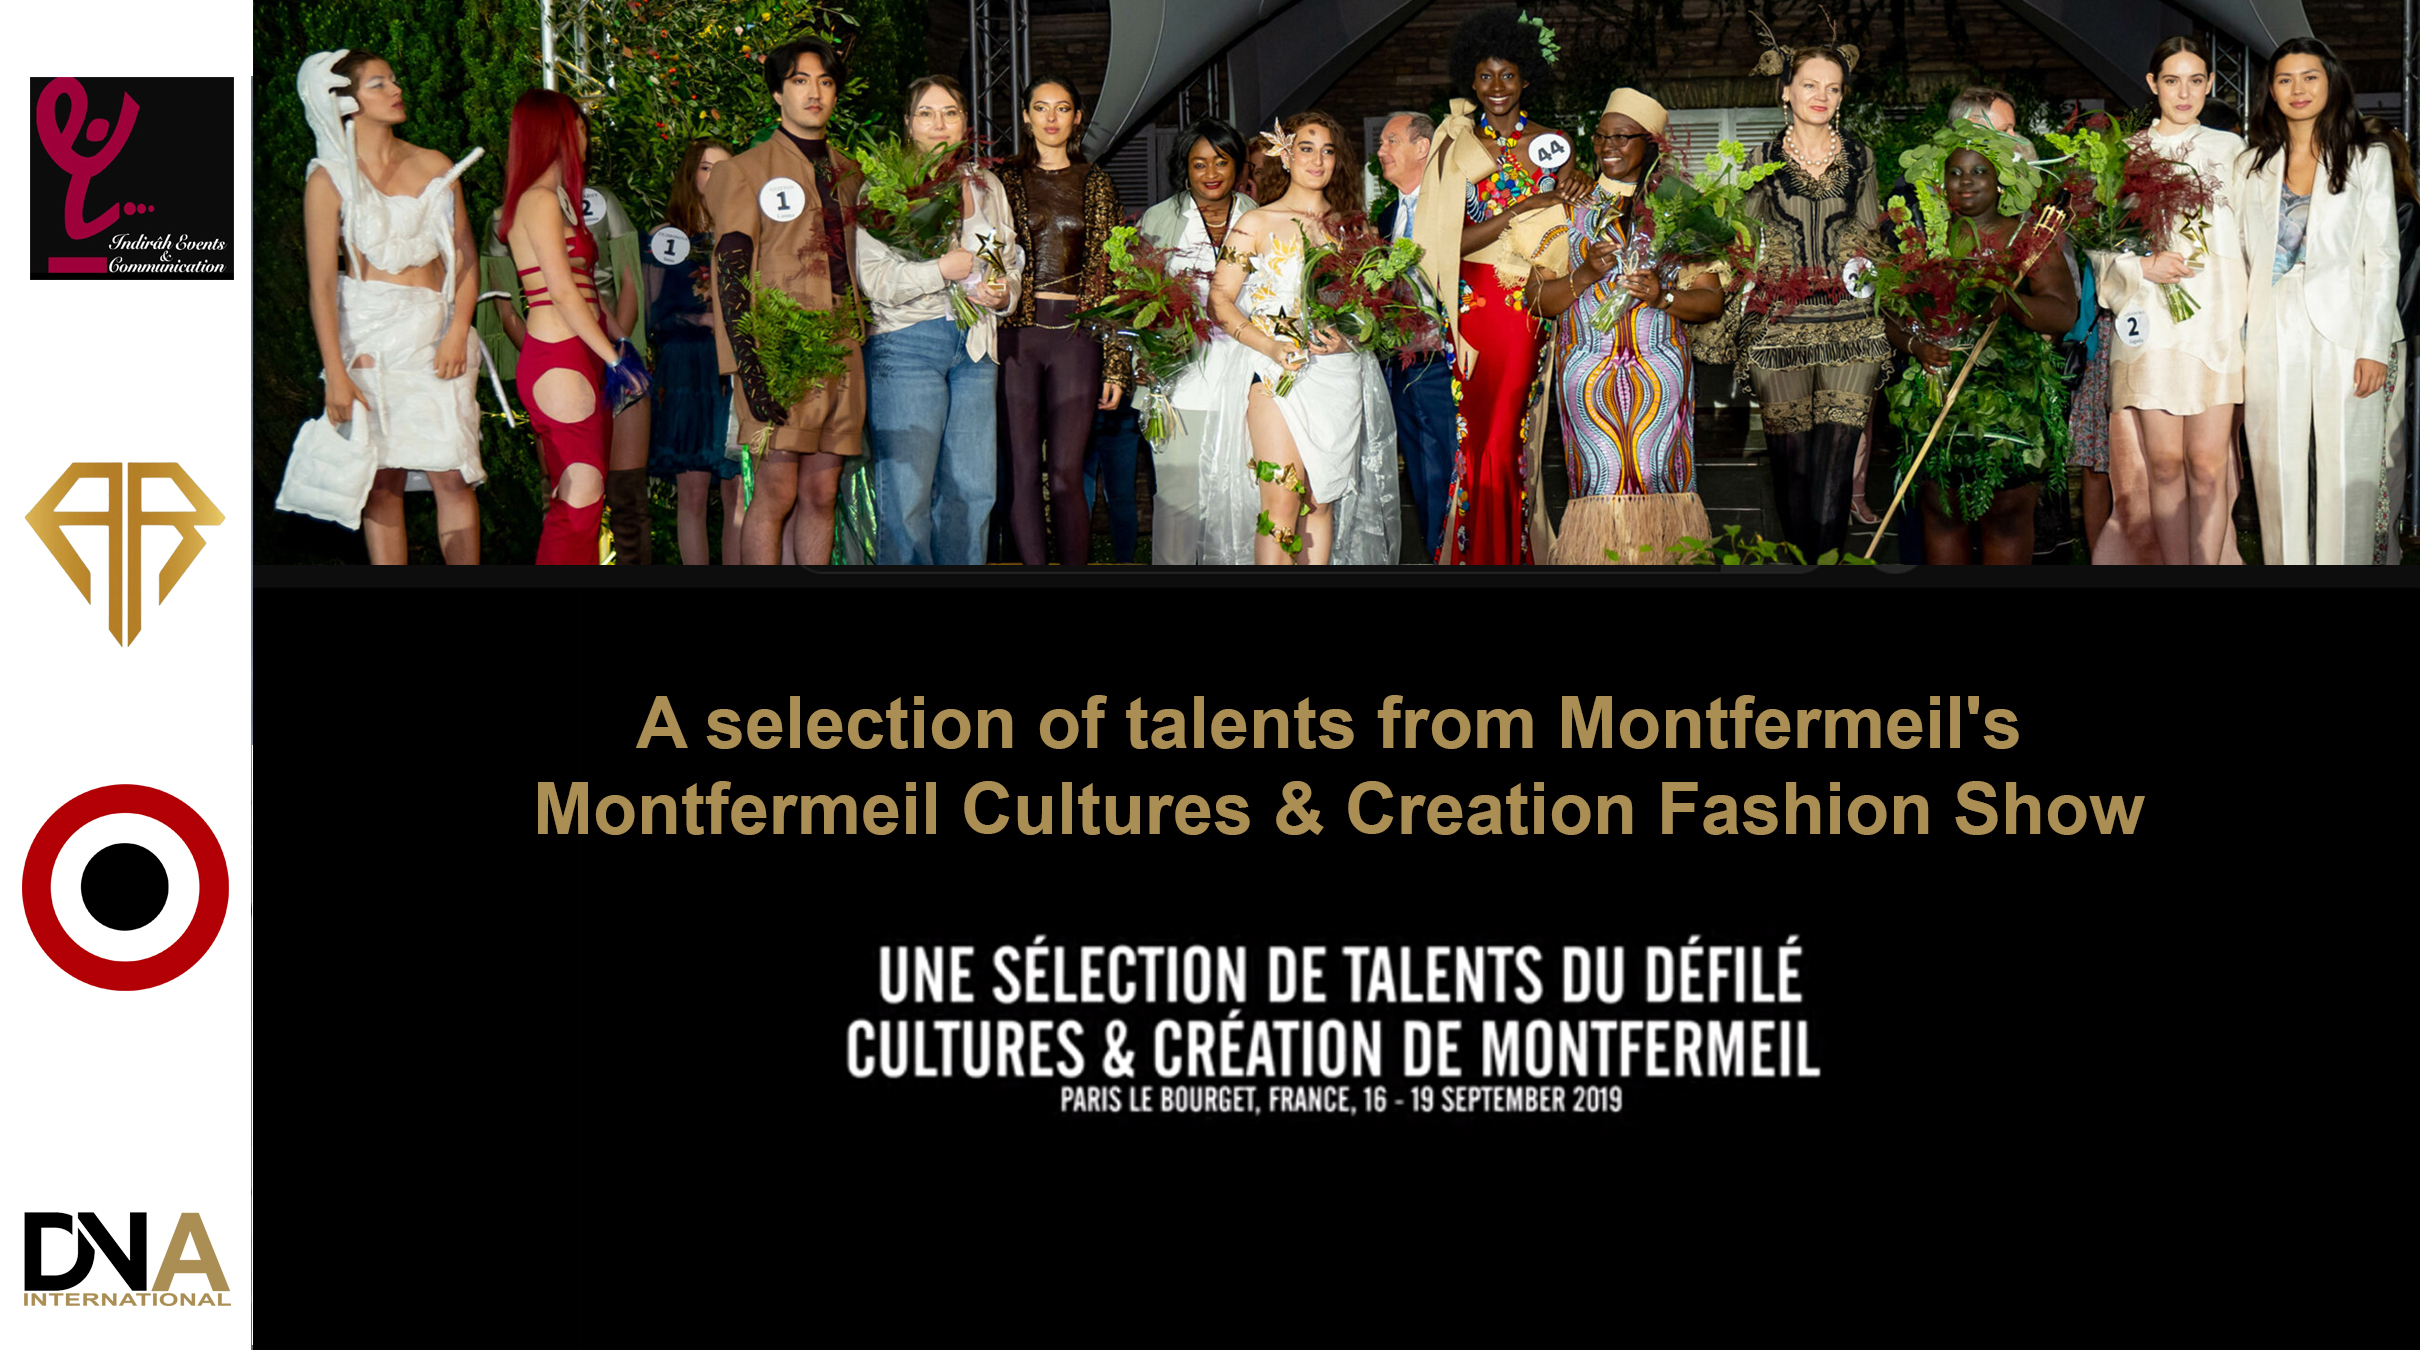 AFRICA-VOGUE-COVER-A-selection-of-talents-from-Montfermeil's-Montfermeil-Cultures-&-Creation-Fashion-Show-DN-AFRICA-Media-Partner